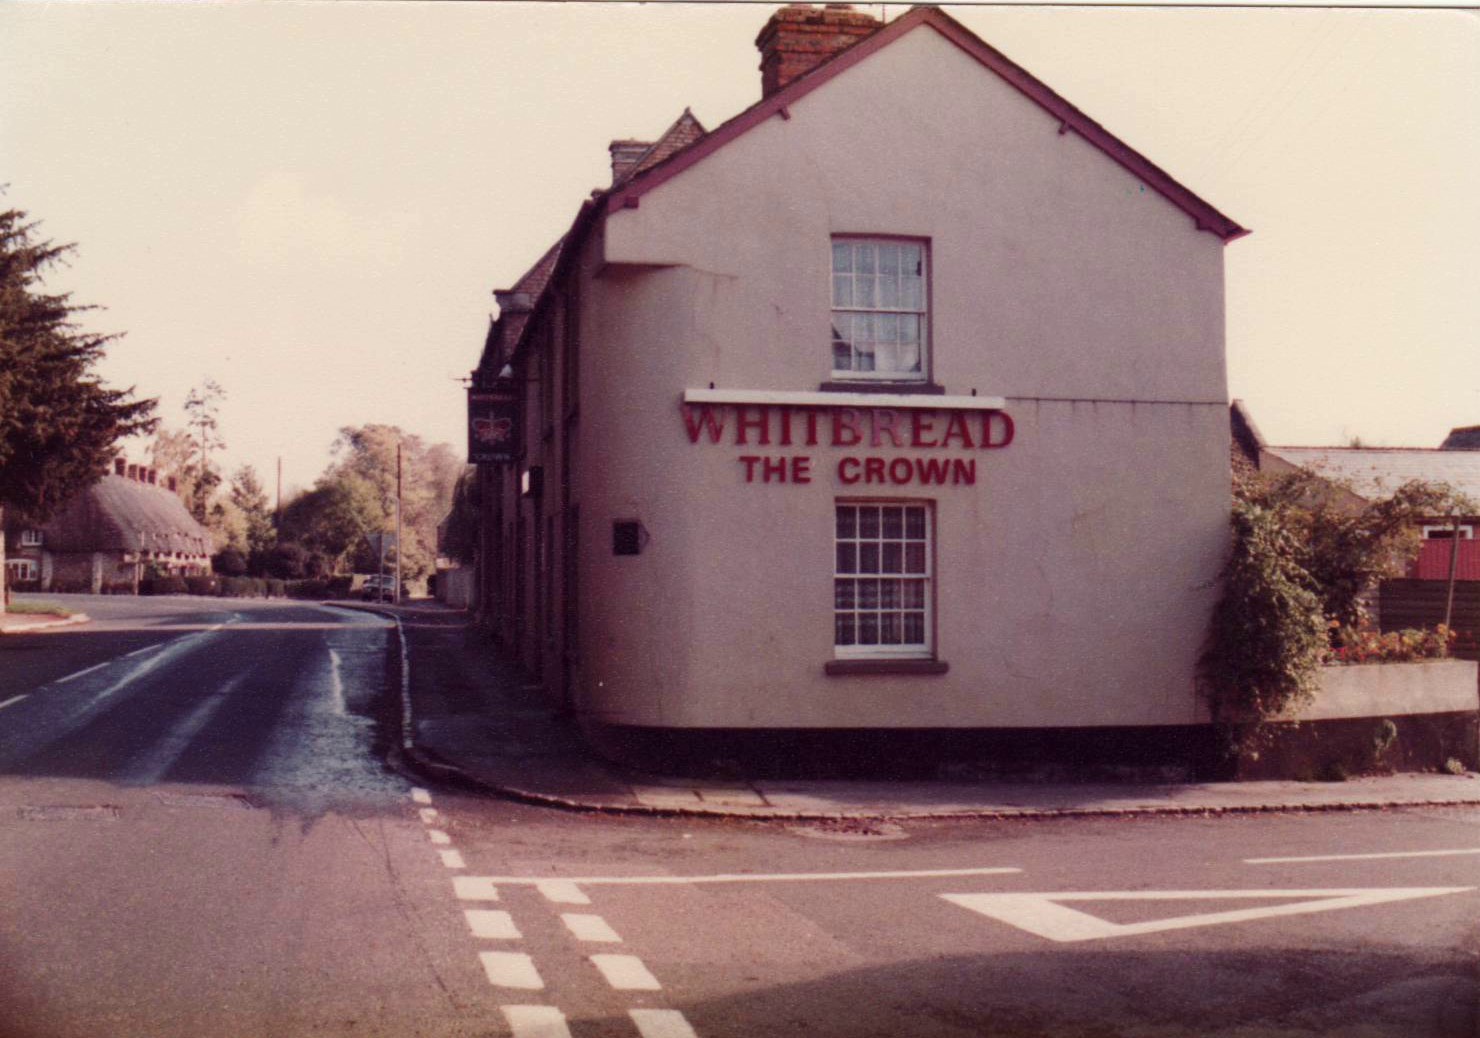 The Crown in the 1970s. Photo taken by the late Roy Selwood